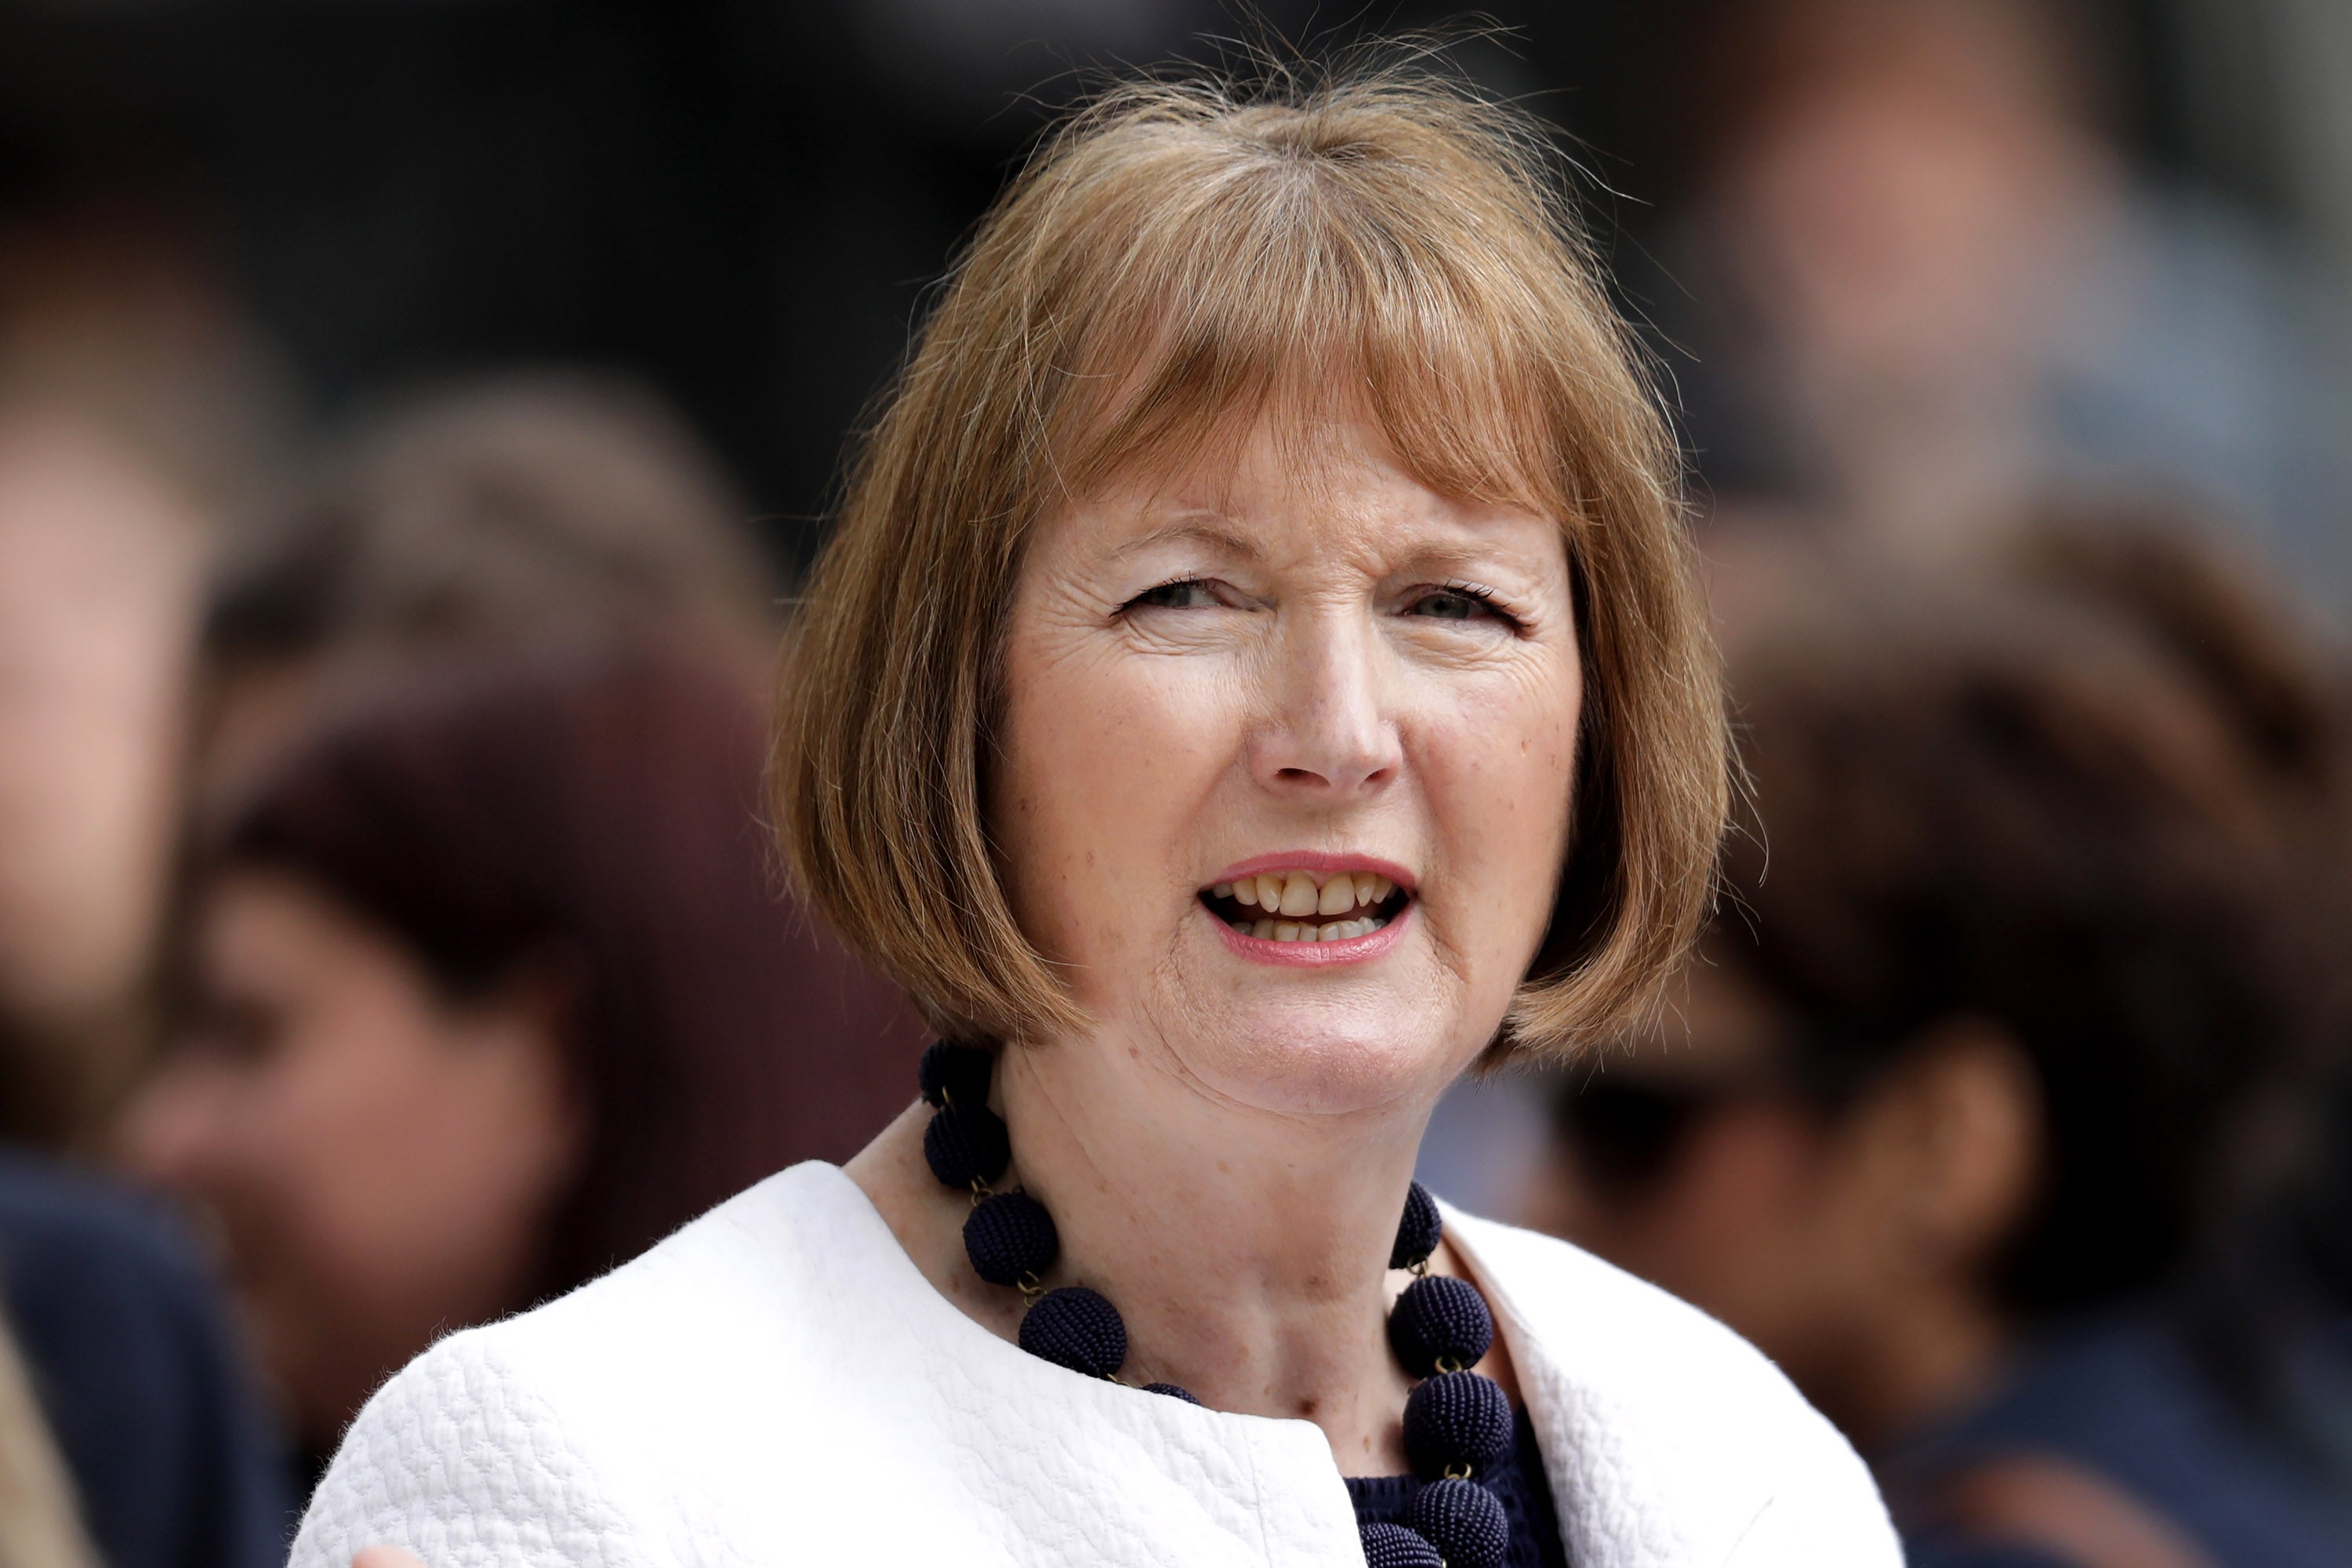 Harriet Harman, the longest continuously serving female MP